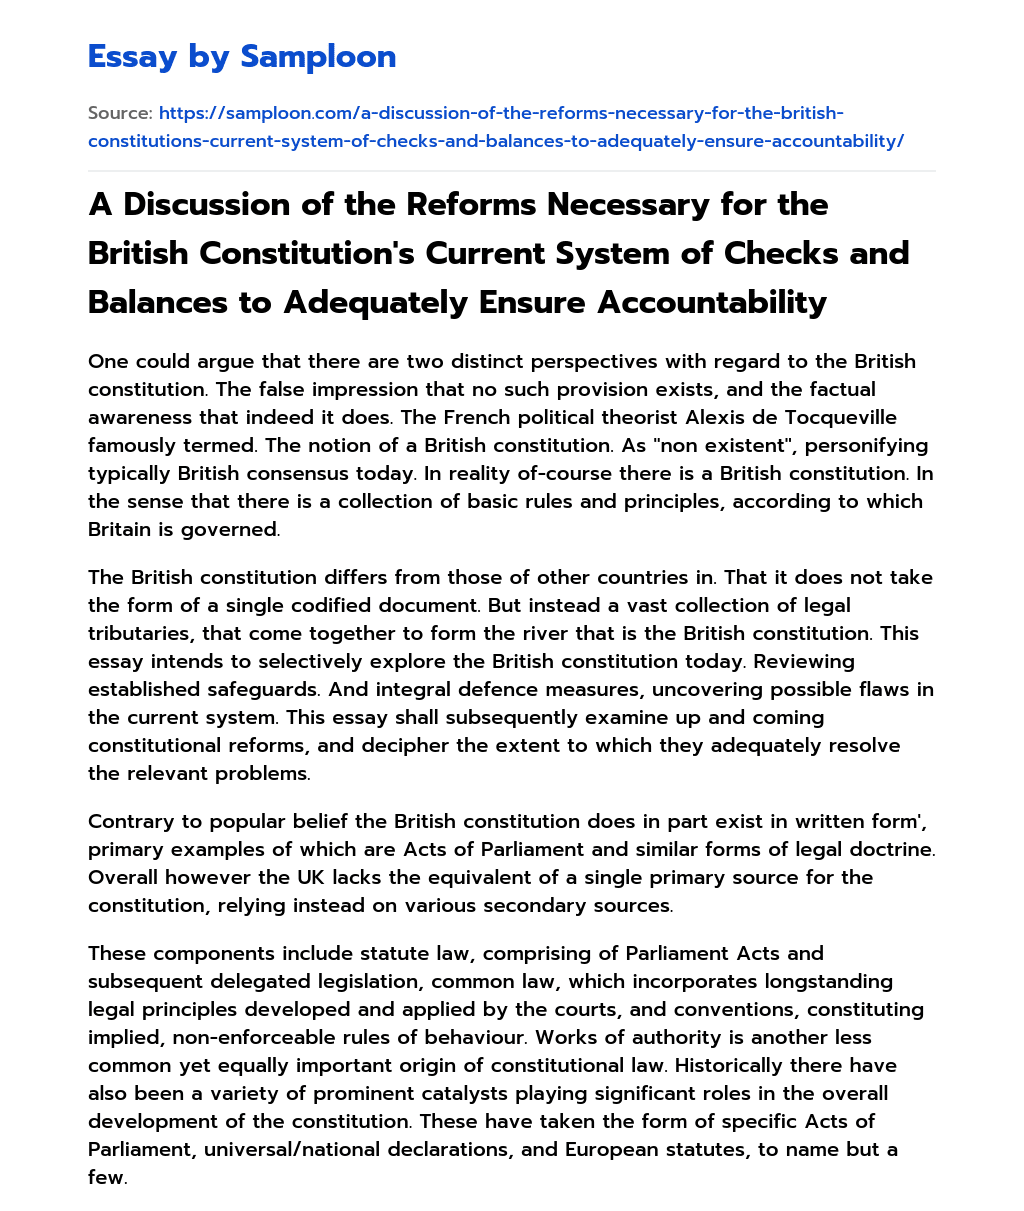 A Discussion of the Reforms Necessary for the British Constitution’s Current System of Checks and Balances to Adequately Ensure Accountability essay